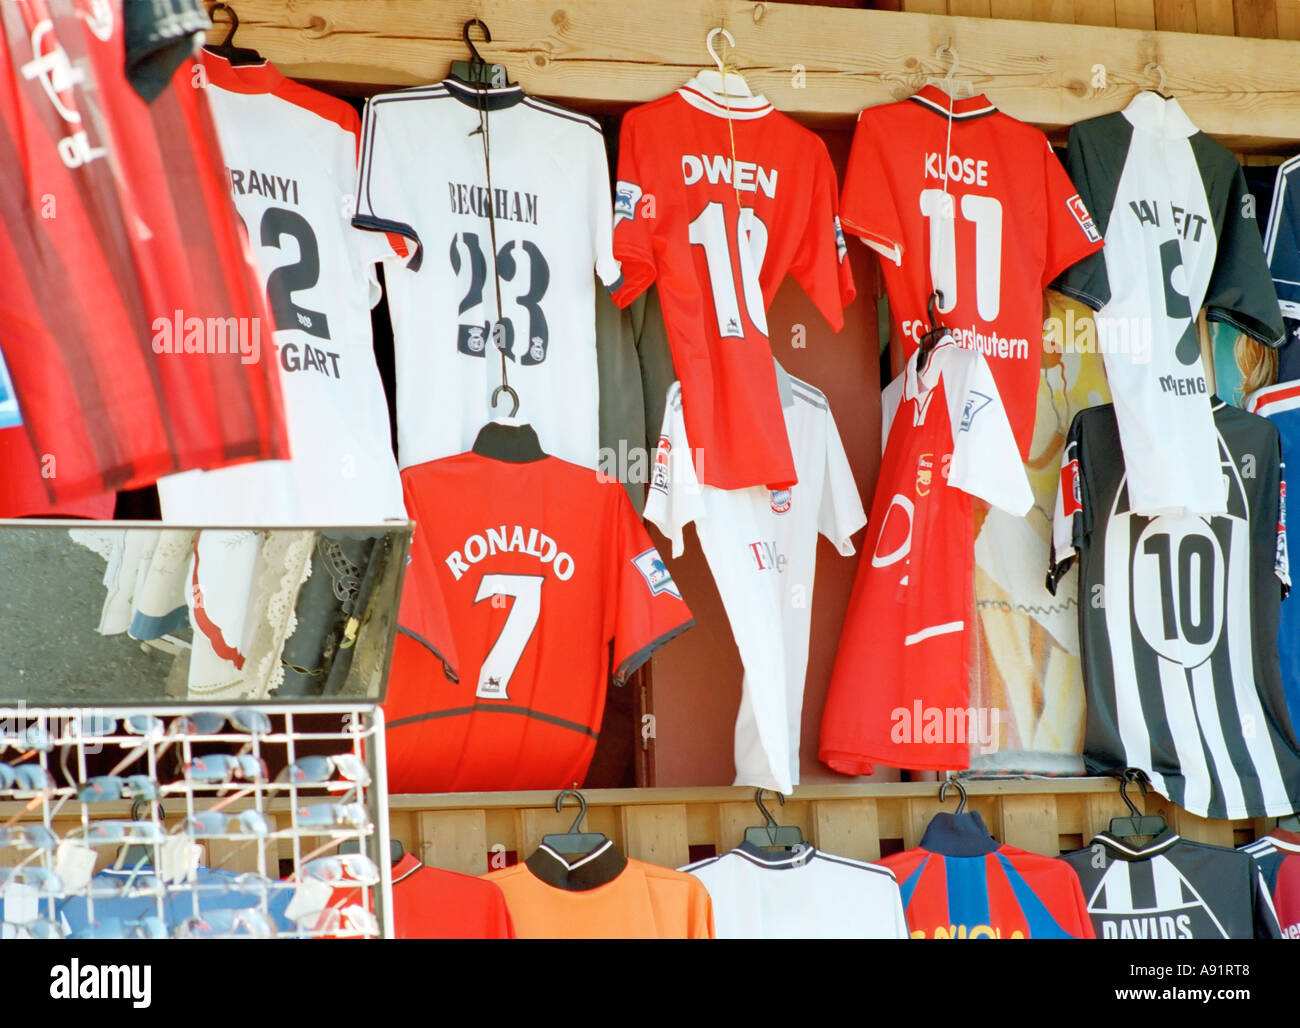 replica football shirts on sale in a market Stock - Alamy